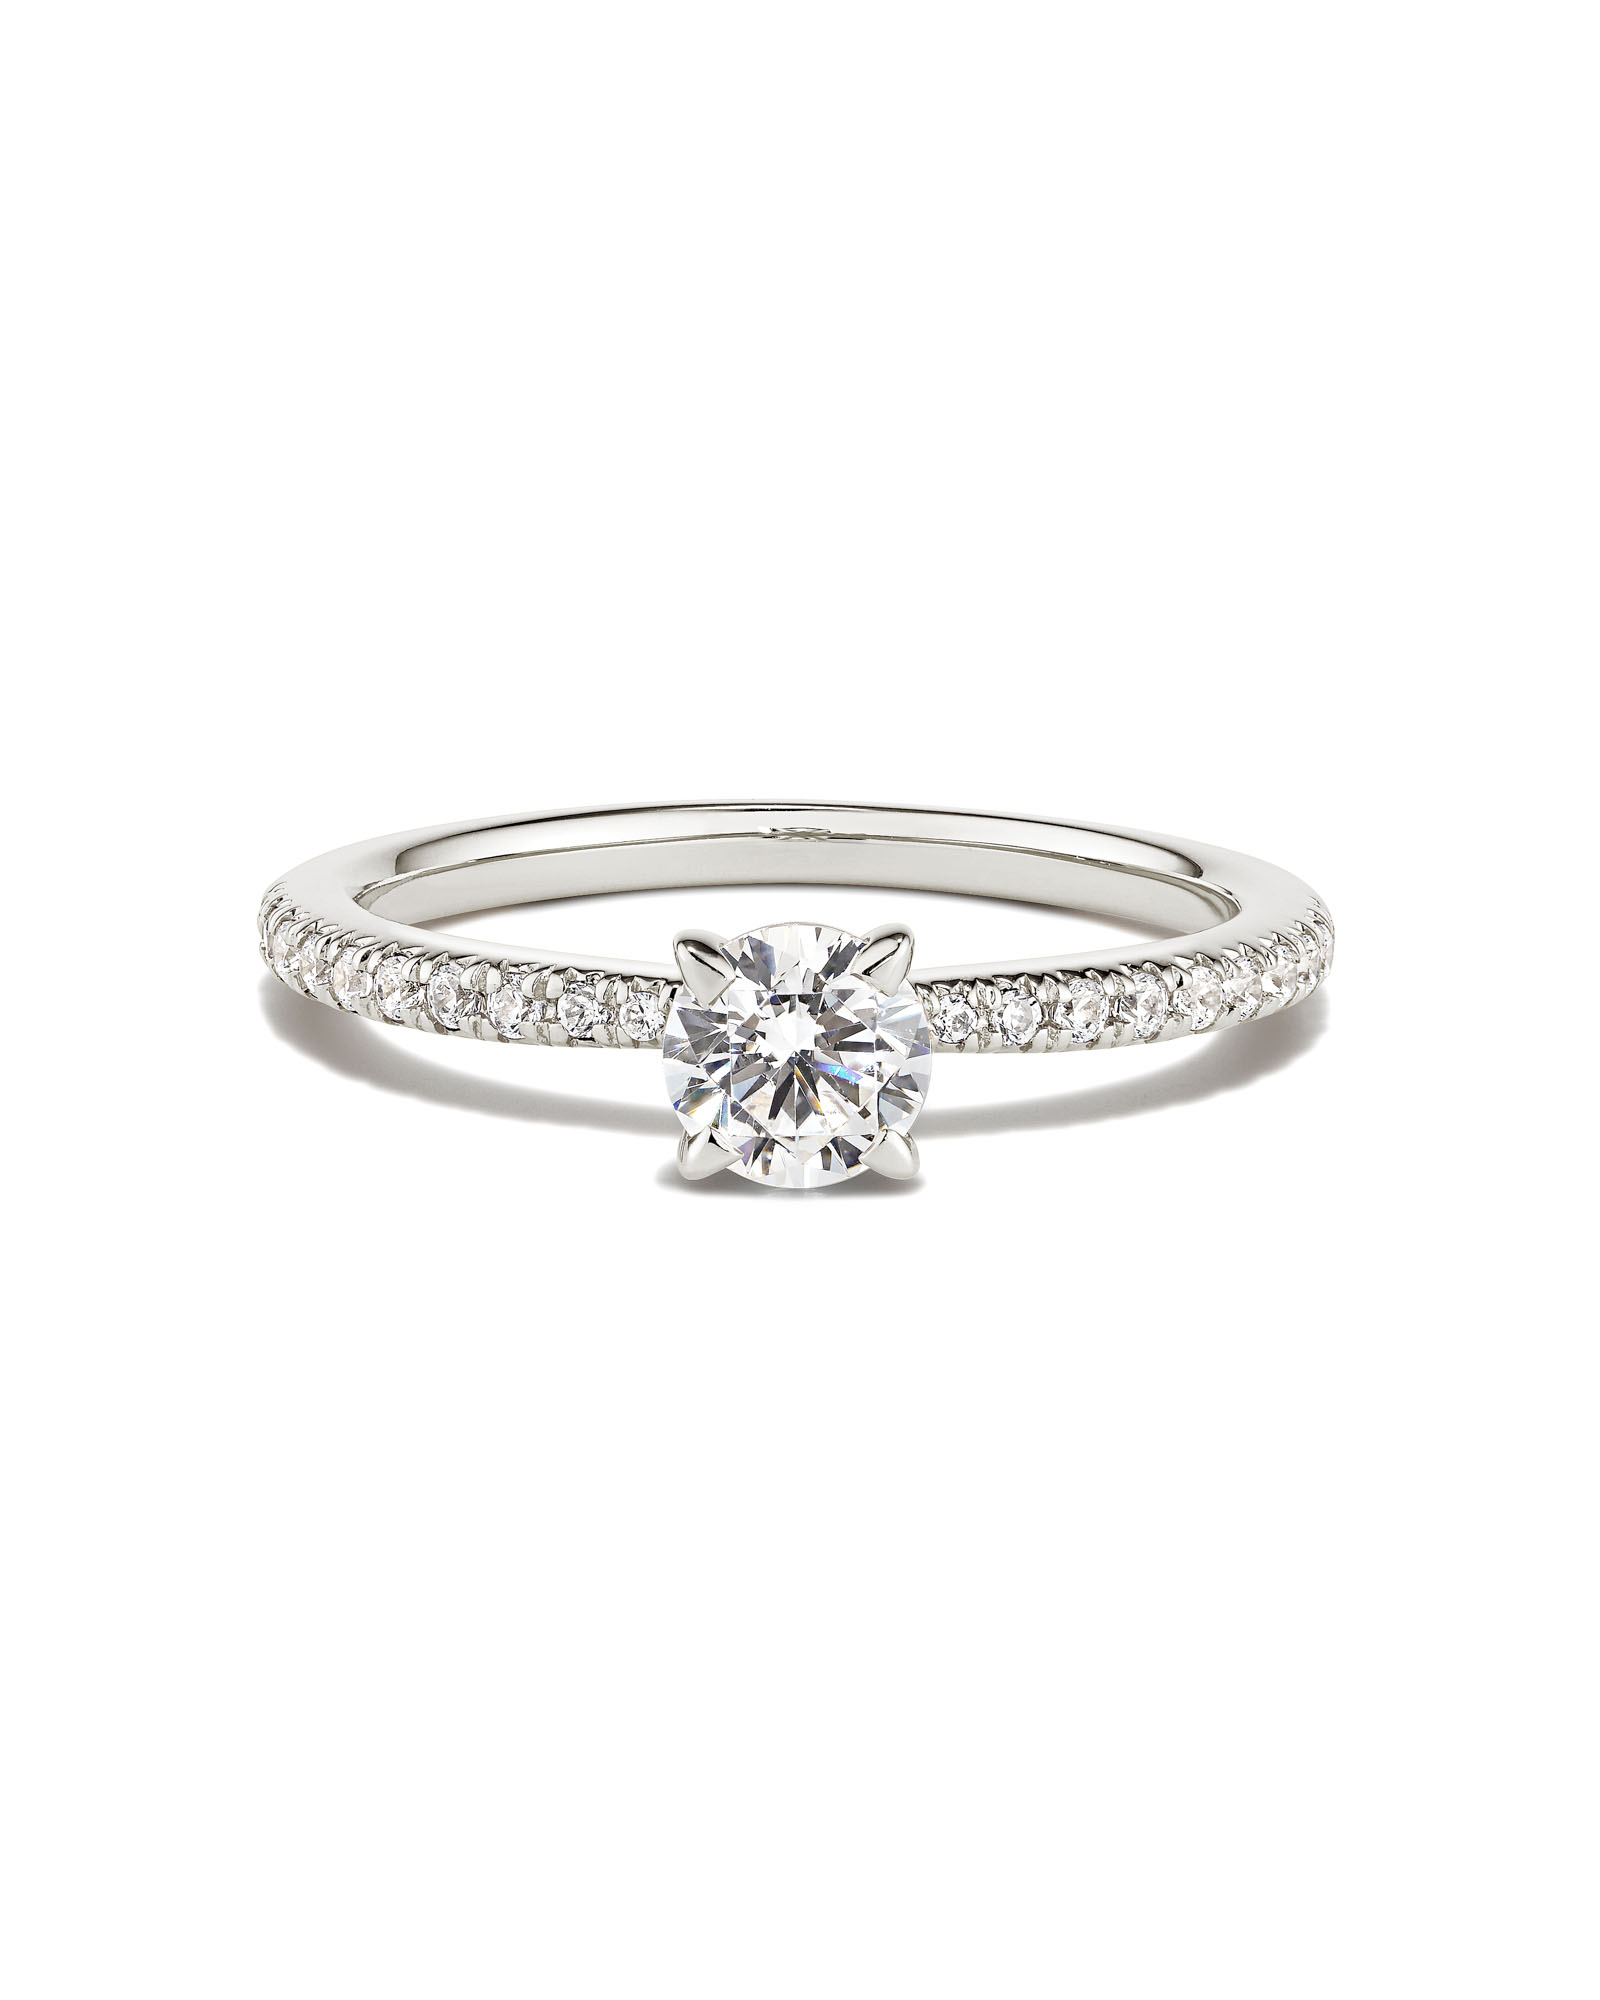 Get the Perfect 14k White Gold Engagement Rings | GLAMIRA.in